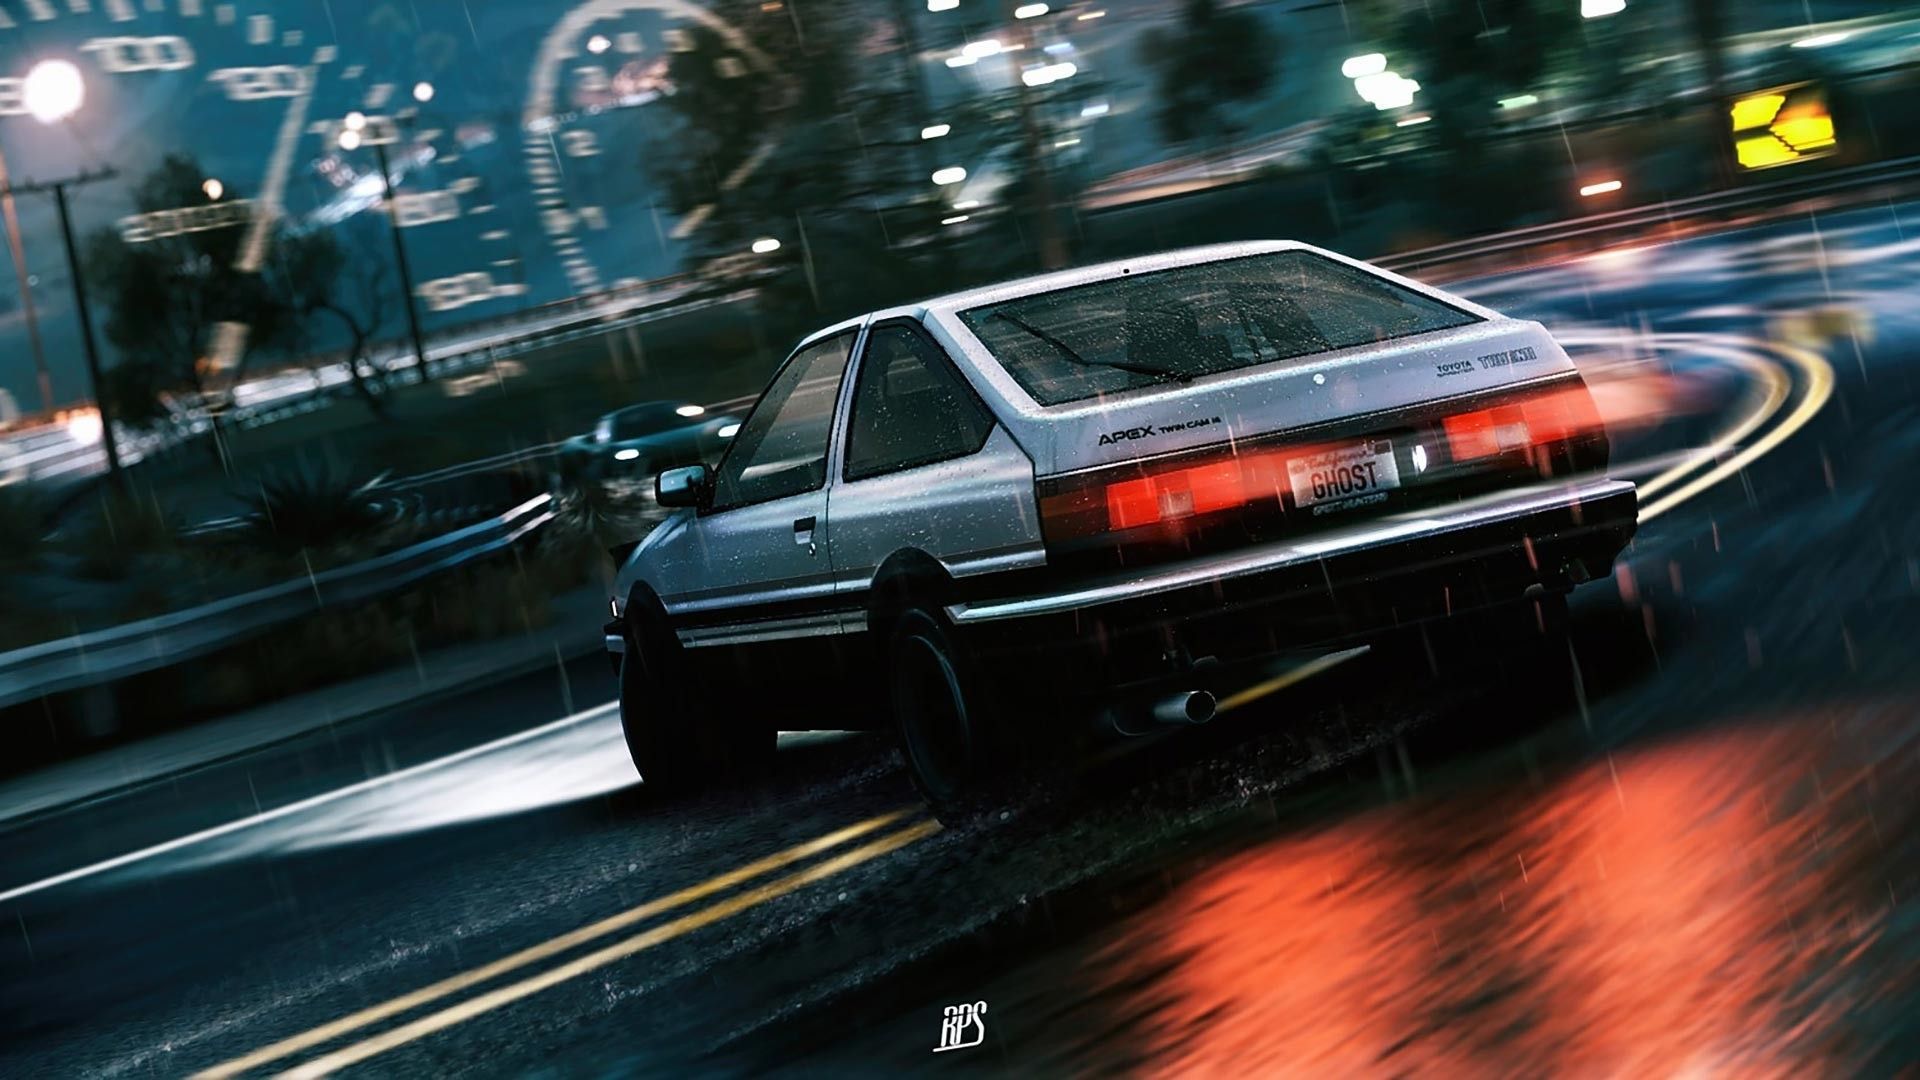 Are you trying to find Initial D Wall Paper? Below are 10 top and newest Initial D Wall Paper for desktop computer wi. Initial d, Jdm wallpaper, Full HD wallpaper